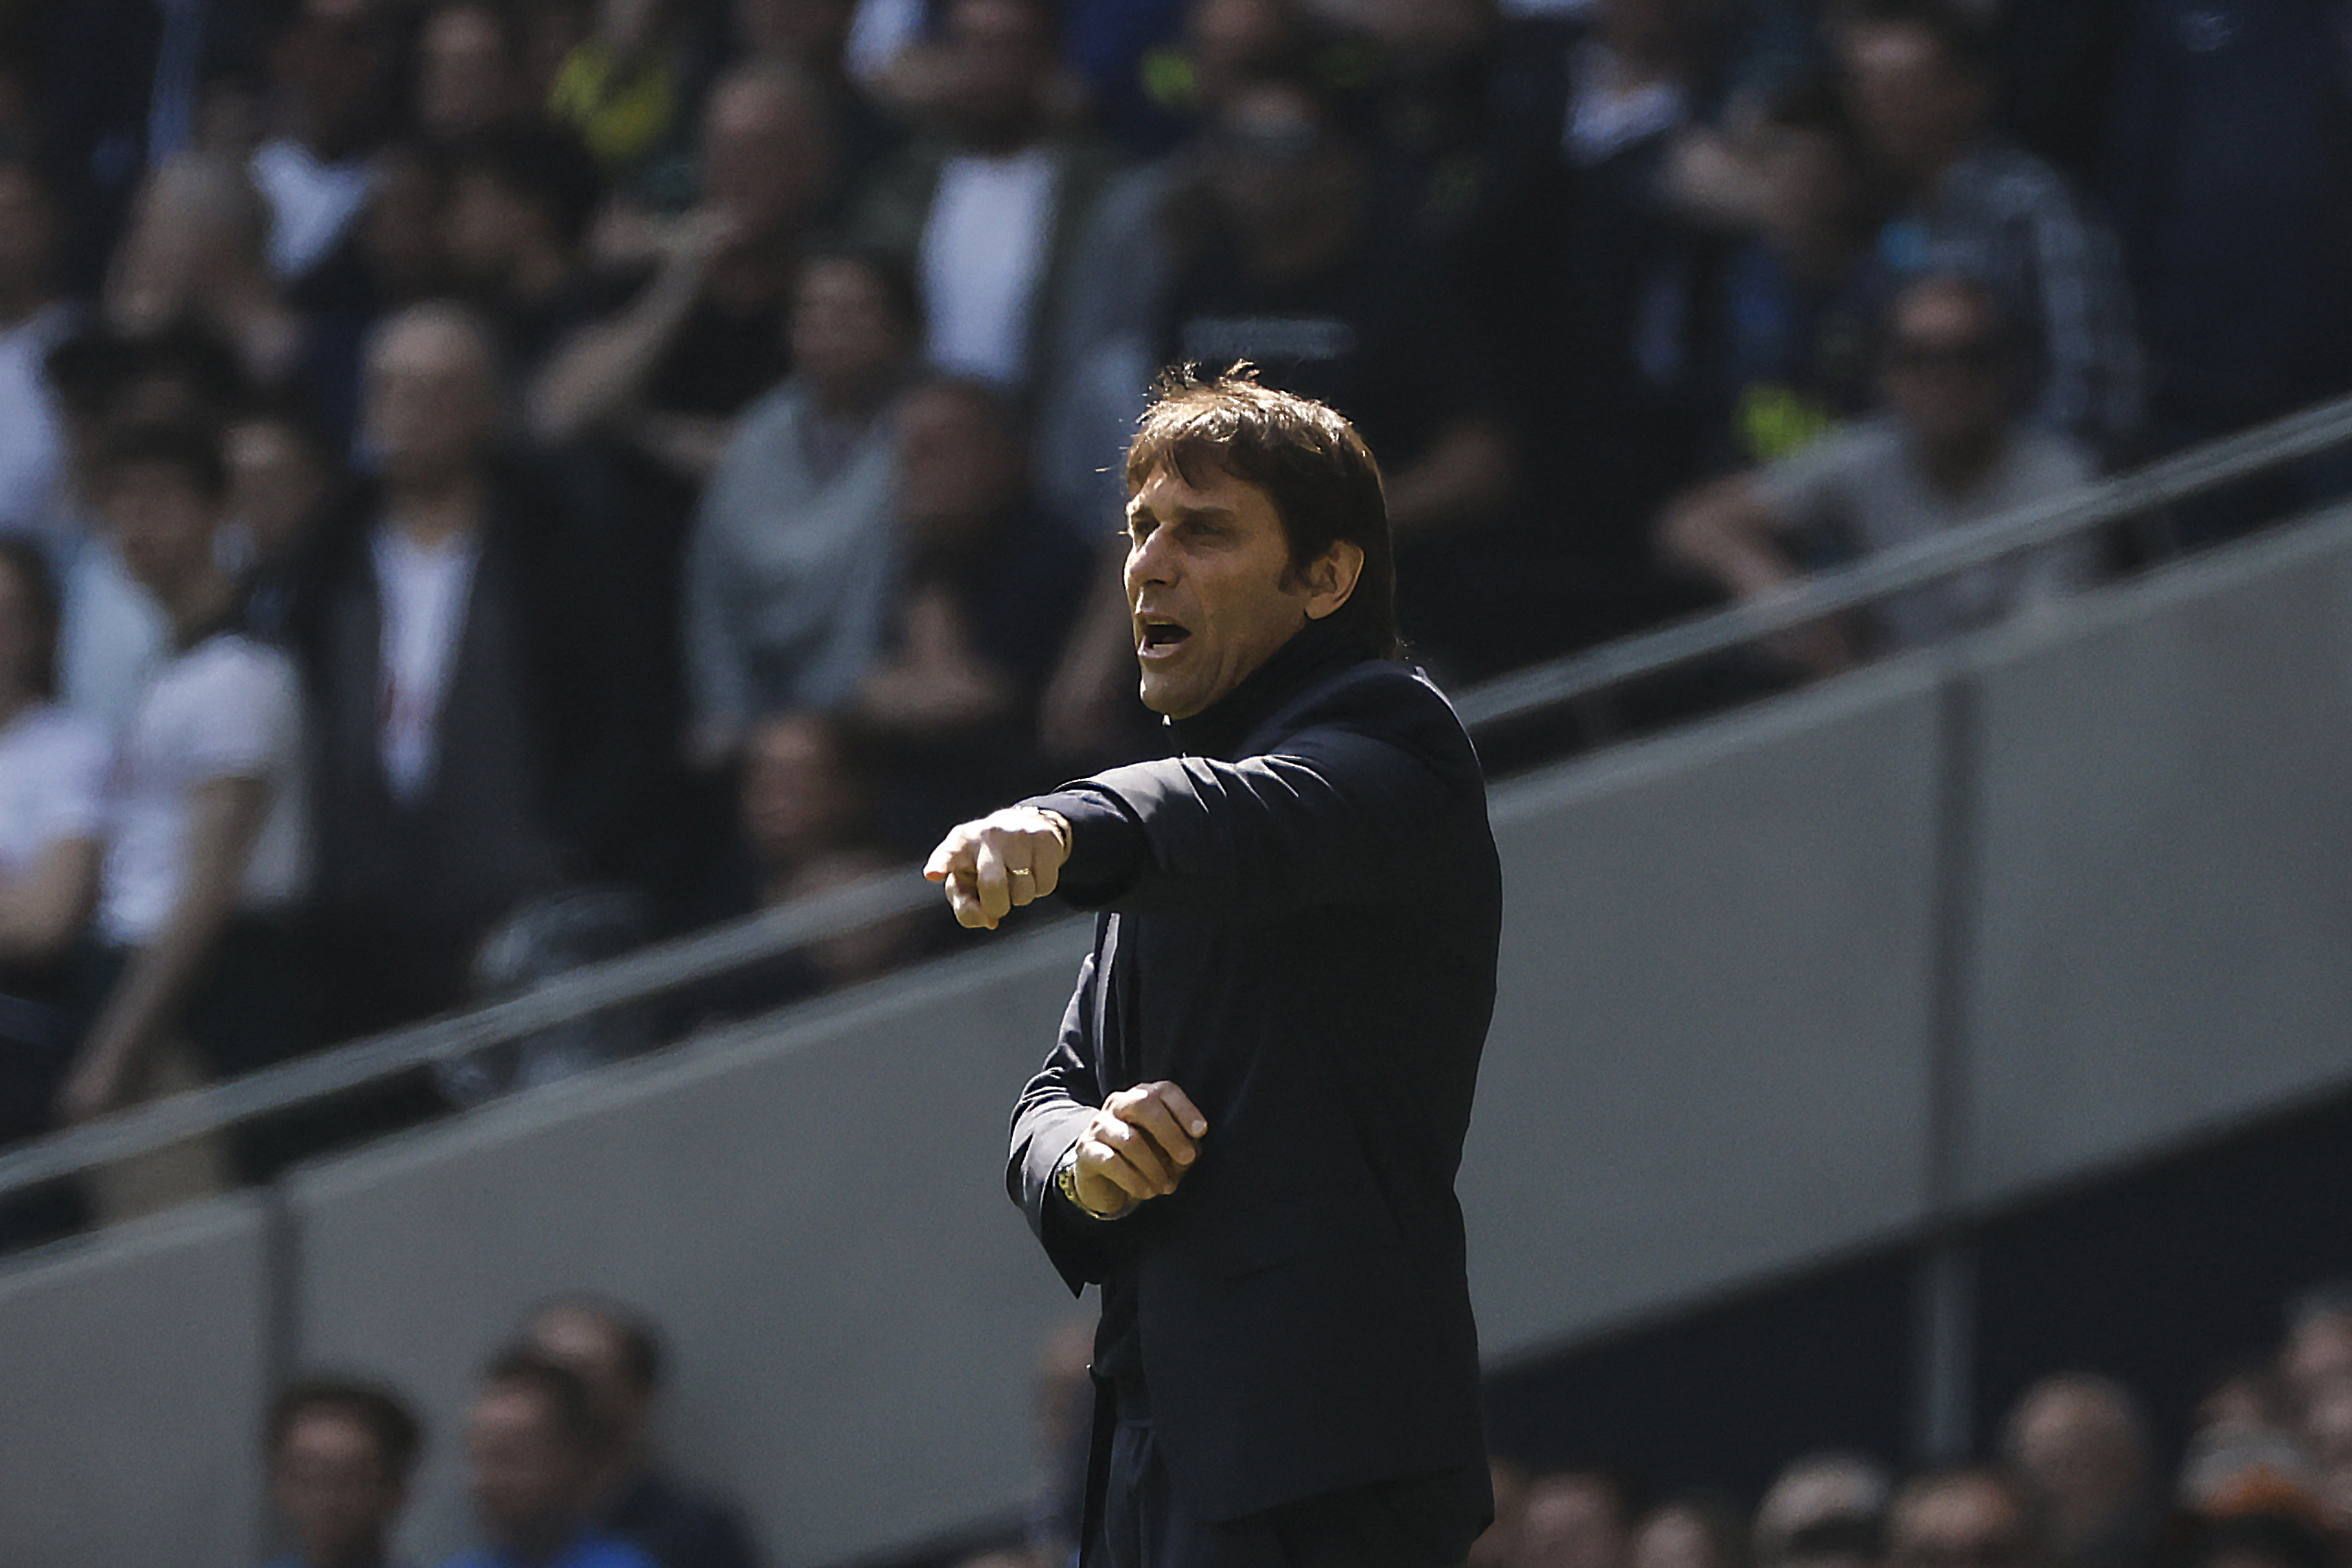 Antonio Conte hints that Tottenham Hotspur may need more new signings.